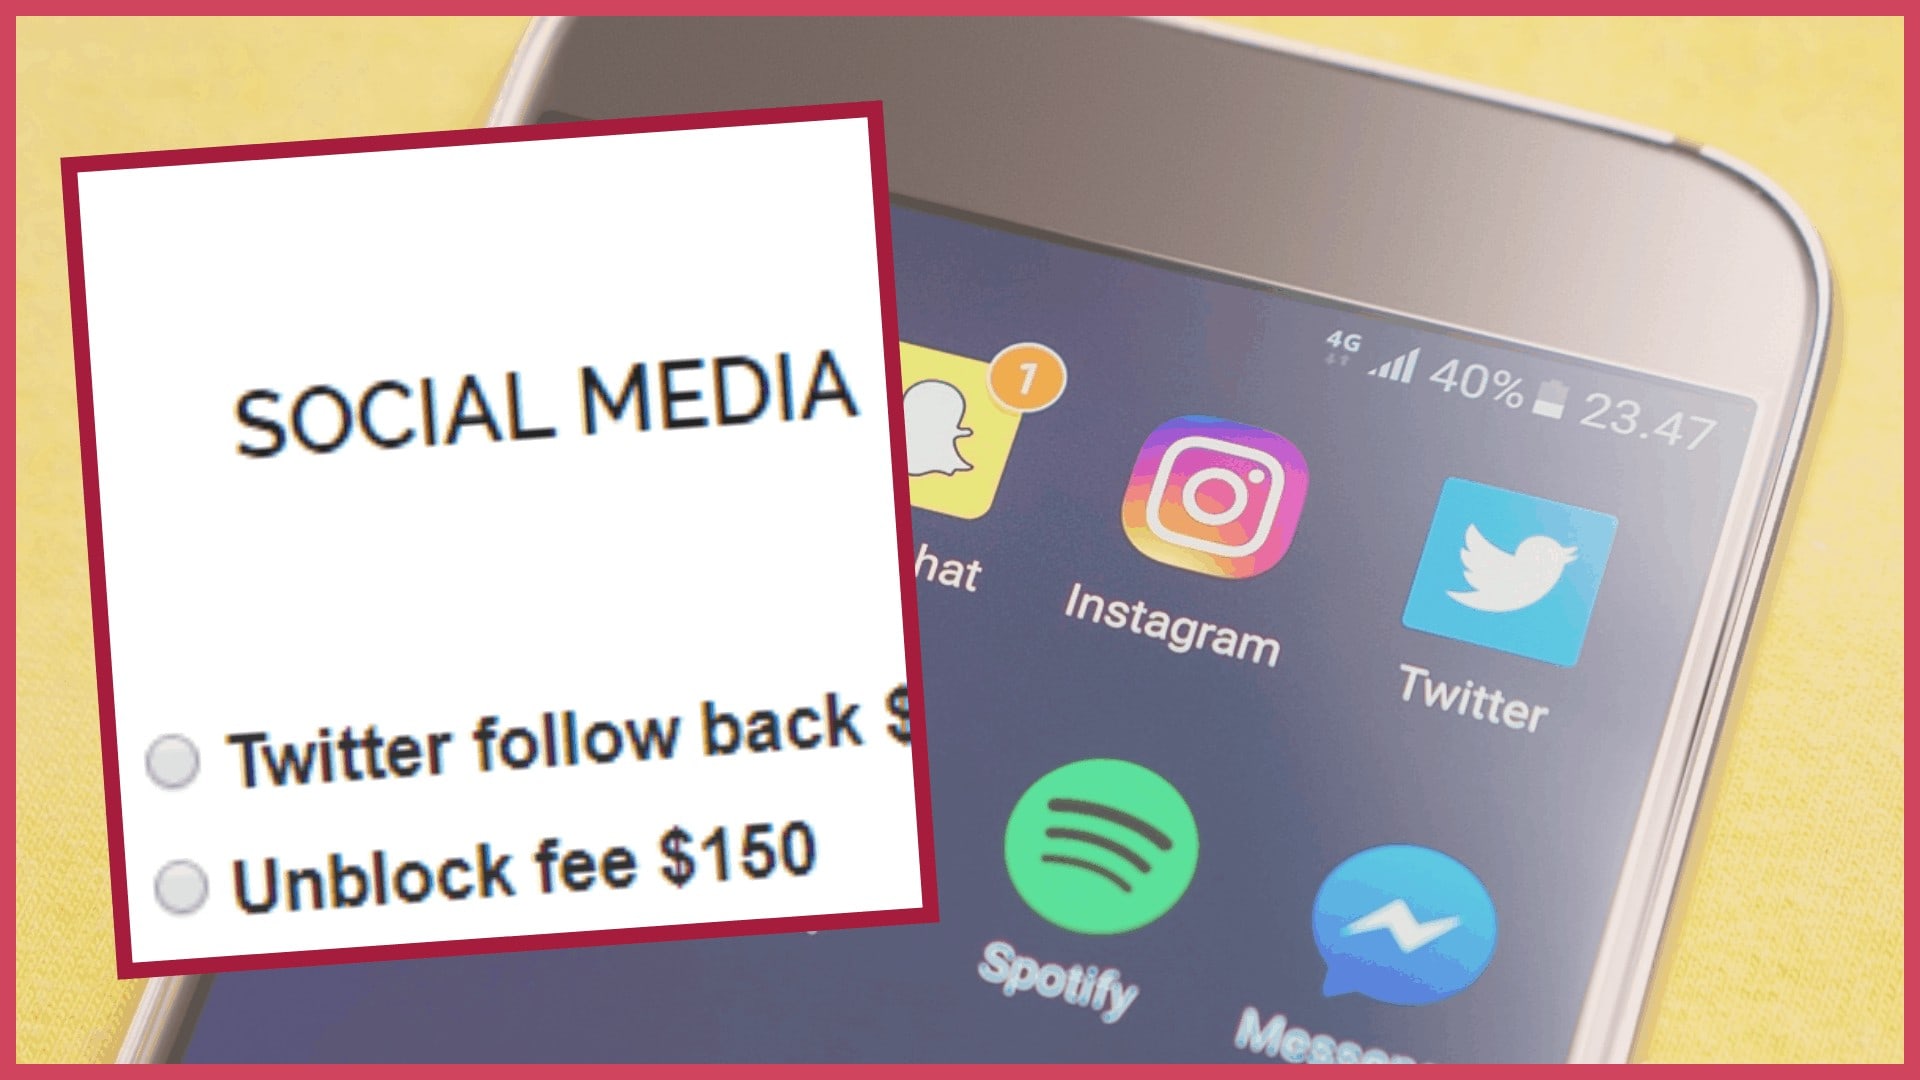 A cell phone with the ability to follow back on social media platforms, like Snapchat, for a $50 unlock fee.